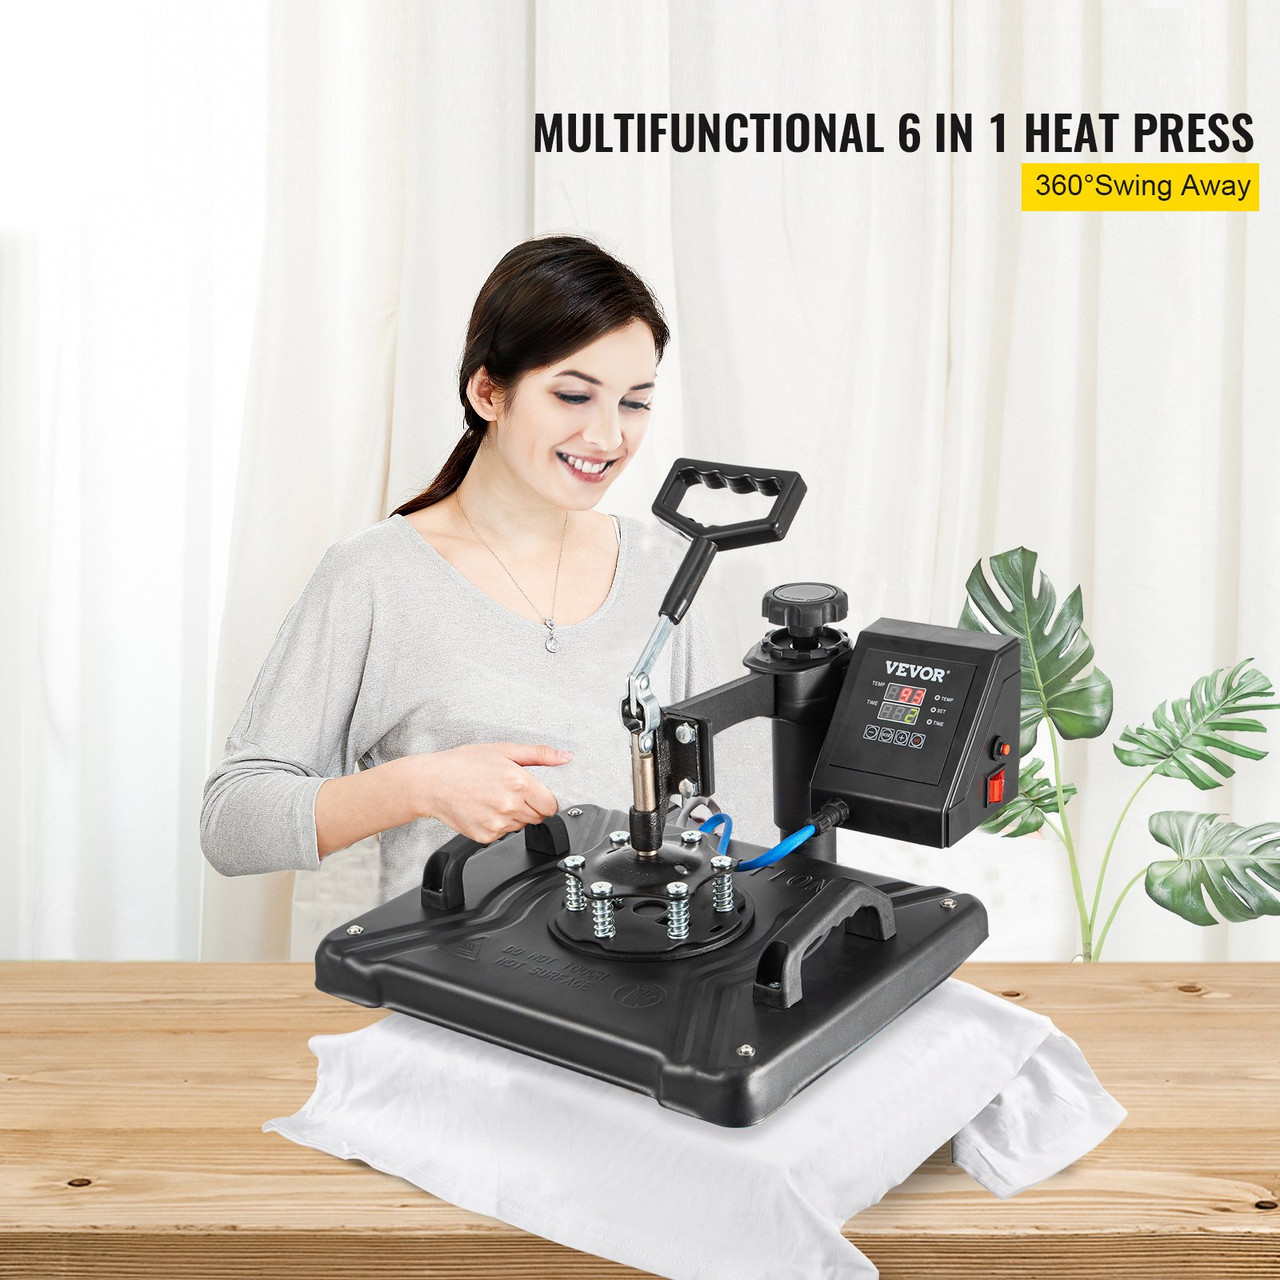 Combo Kit Sublimation Swing away 5 in 1 Heat Press Machine For T